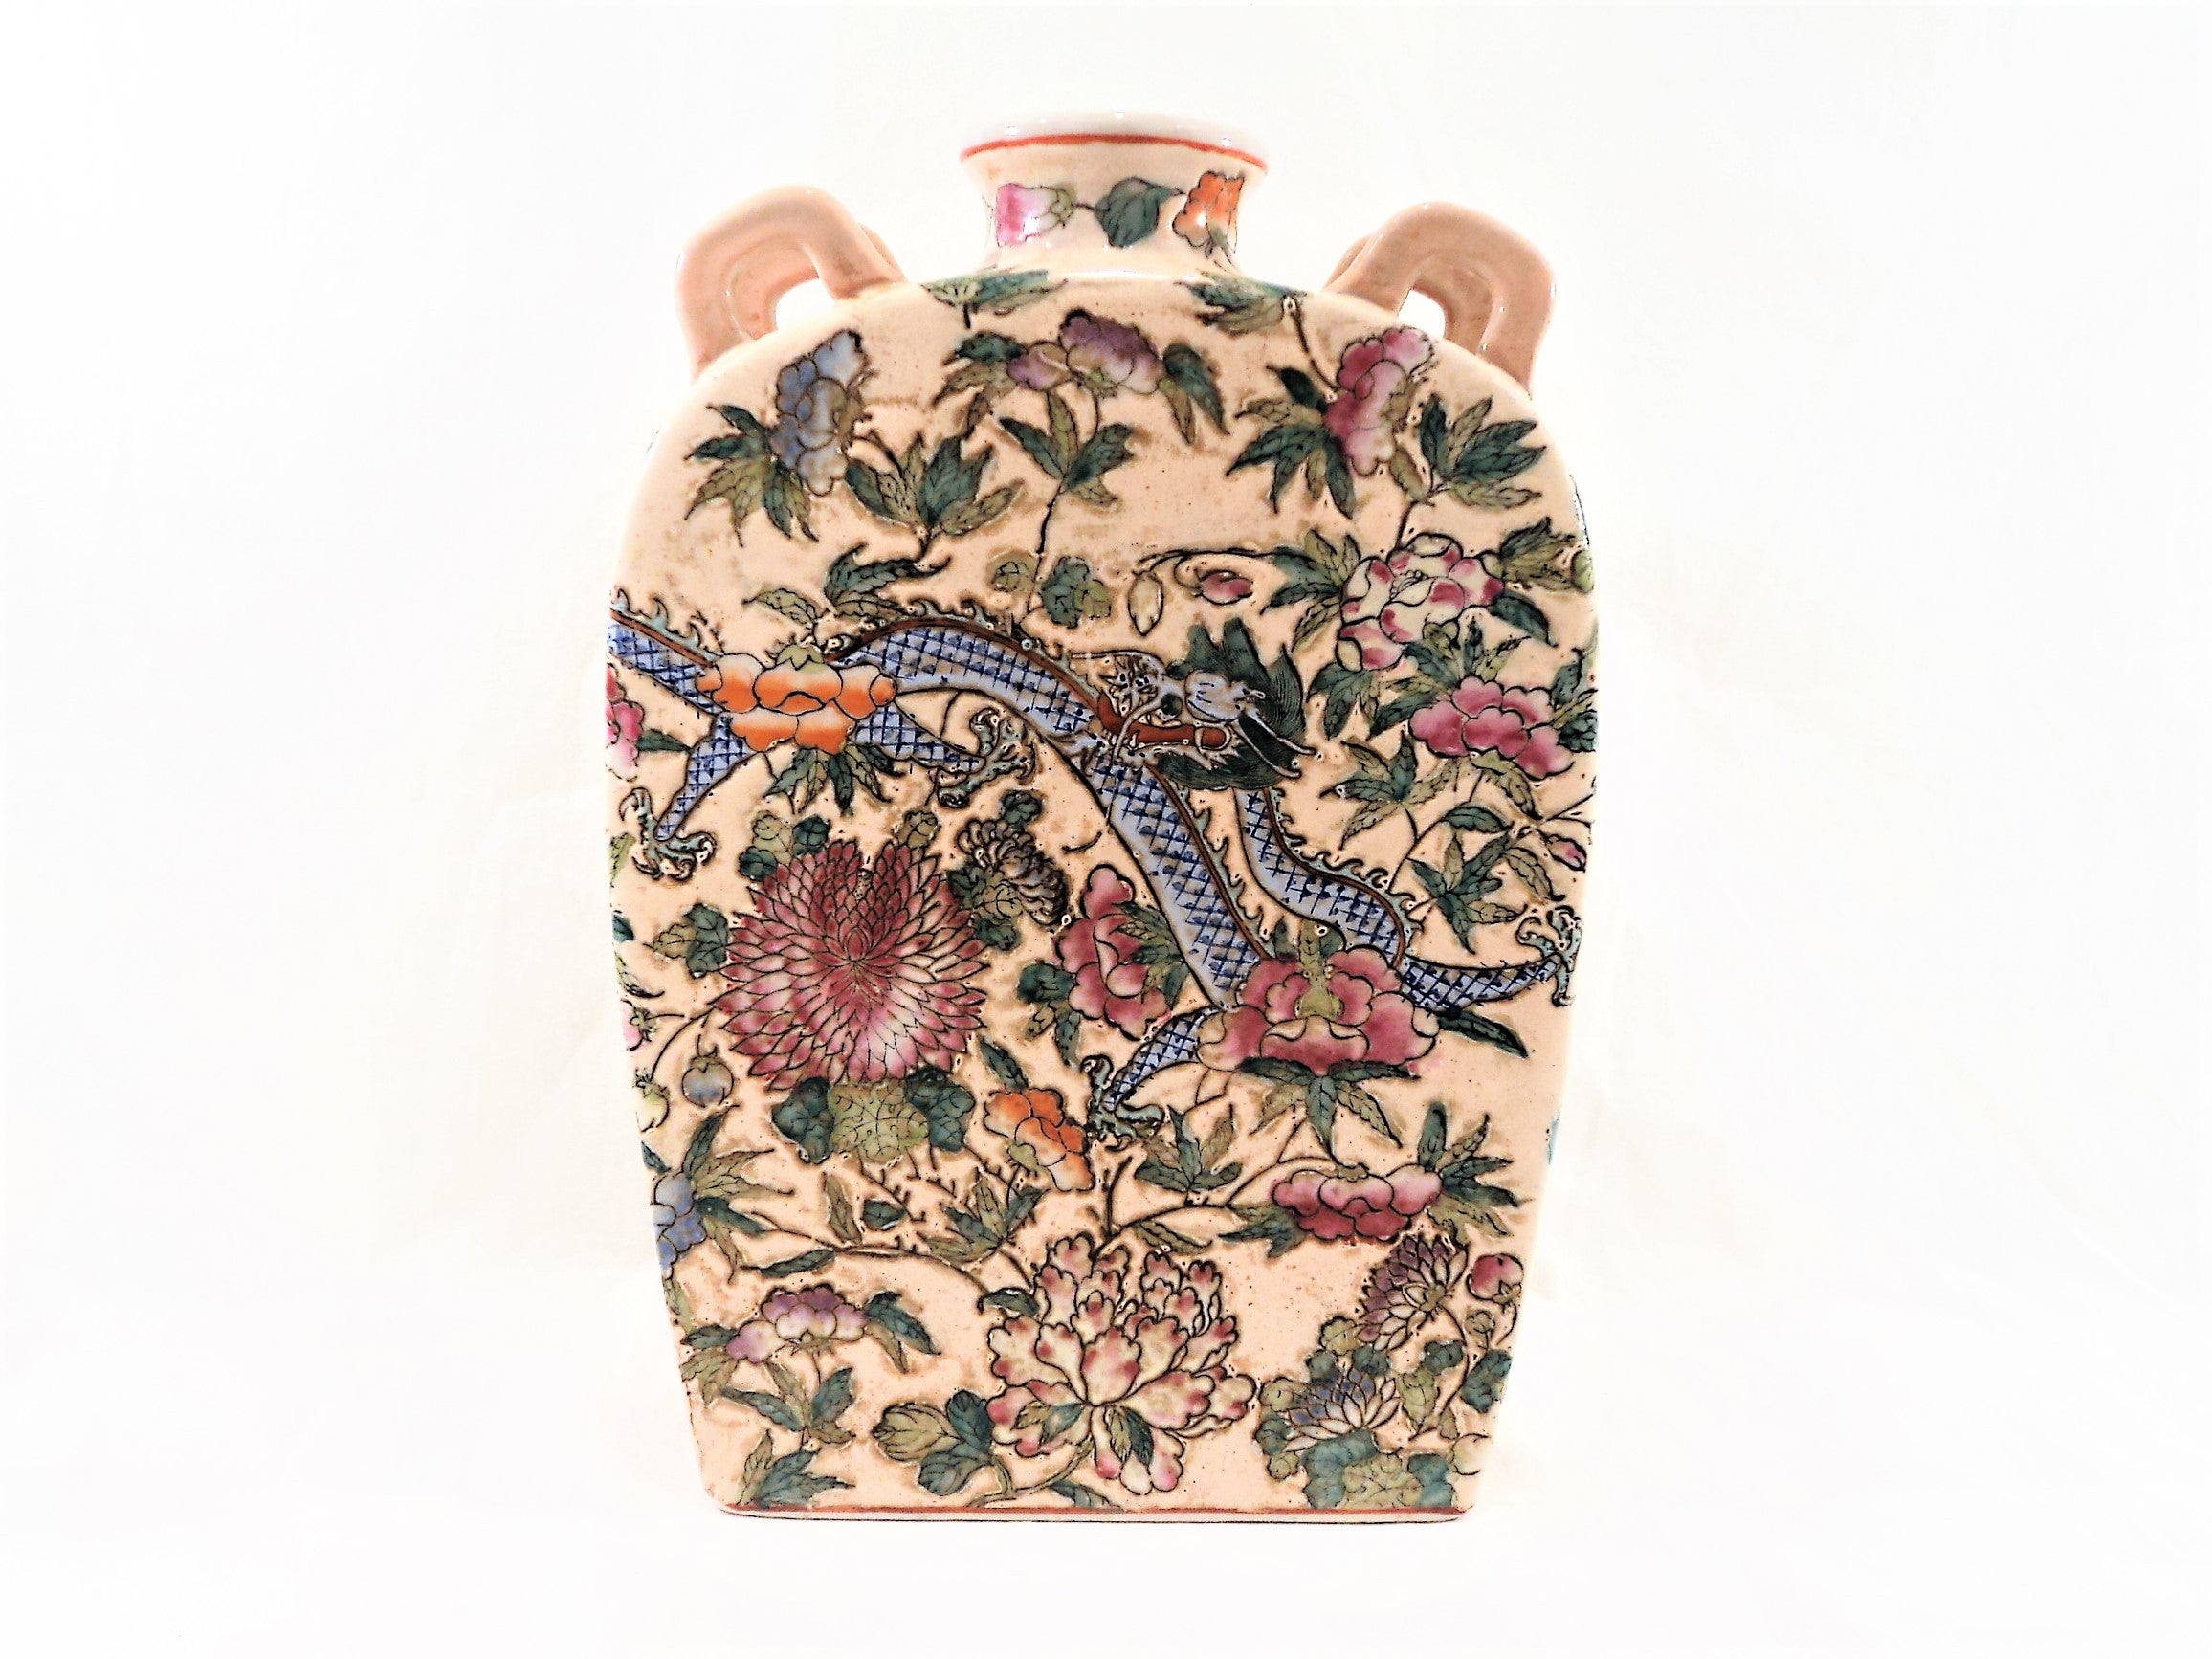 Qing Dynasty Antique Large Porcelain Flask with Dragons